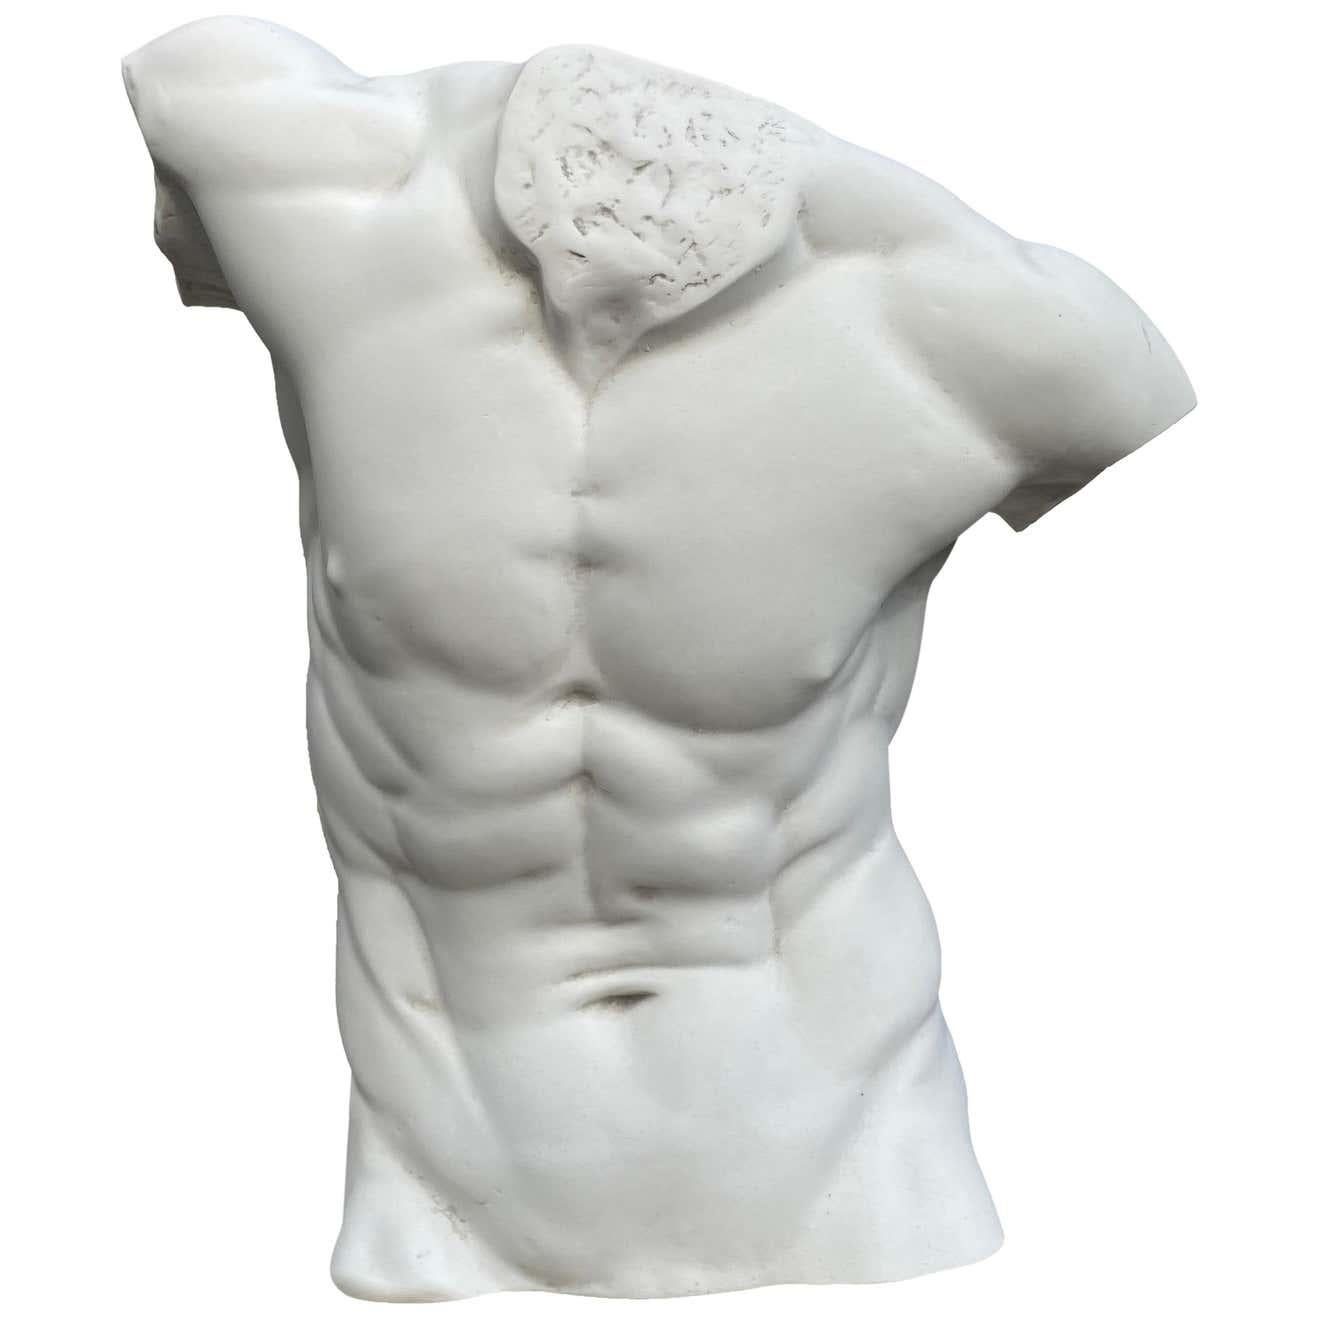 This large male torso statue resembles the classical movement of the famous Laocoön and Belvedere torso in the Vatican Museums. Stunningly well executed, this marble sculpture of a naked male torso has incredible details at the back and front